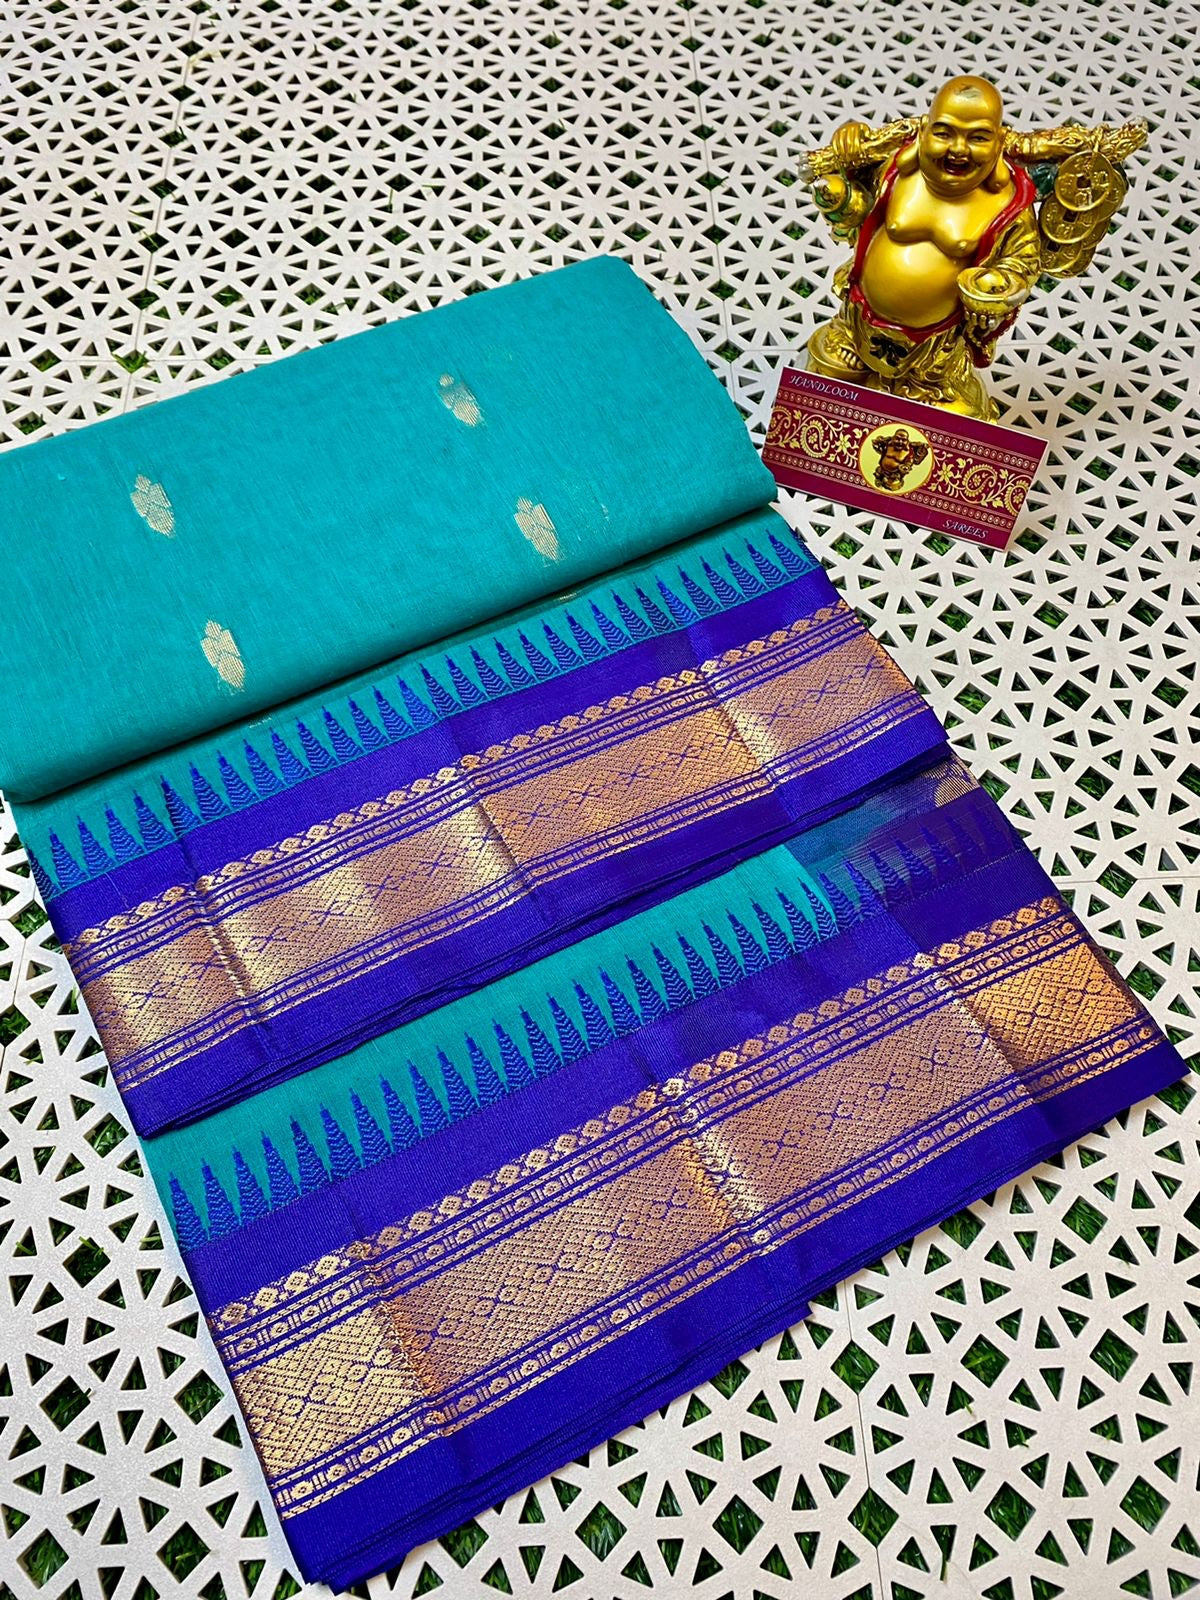 Blue Pure soft cotton temple border saree - soft and light weight - saree for women in uk